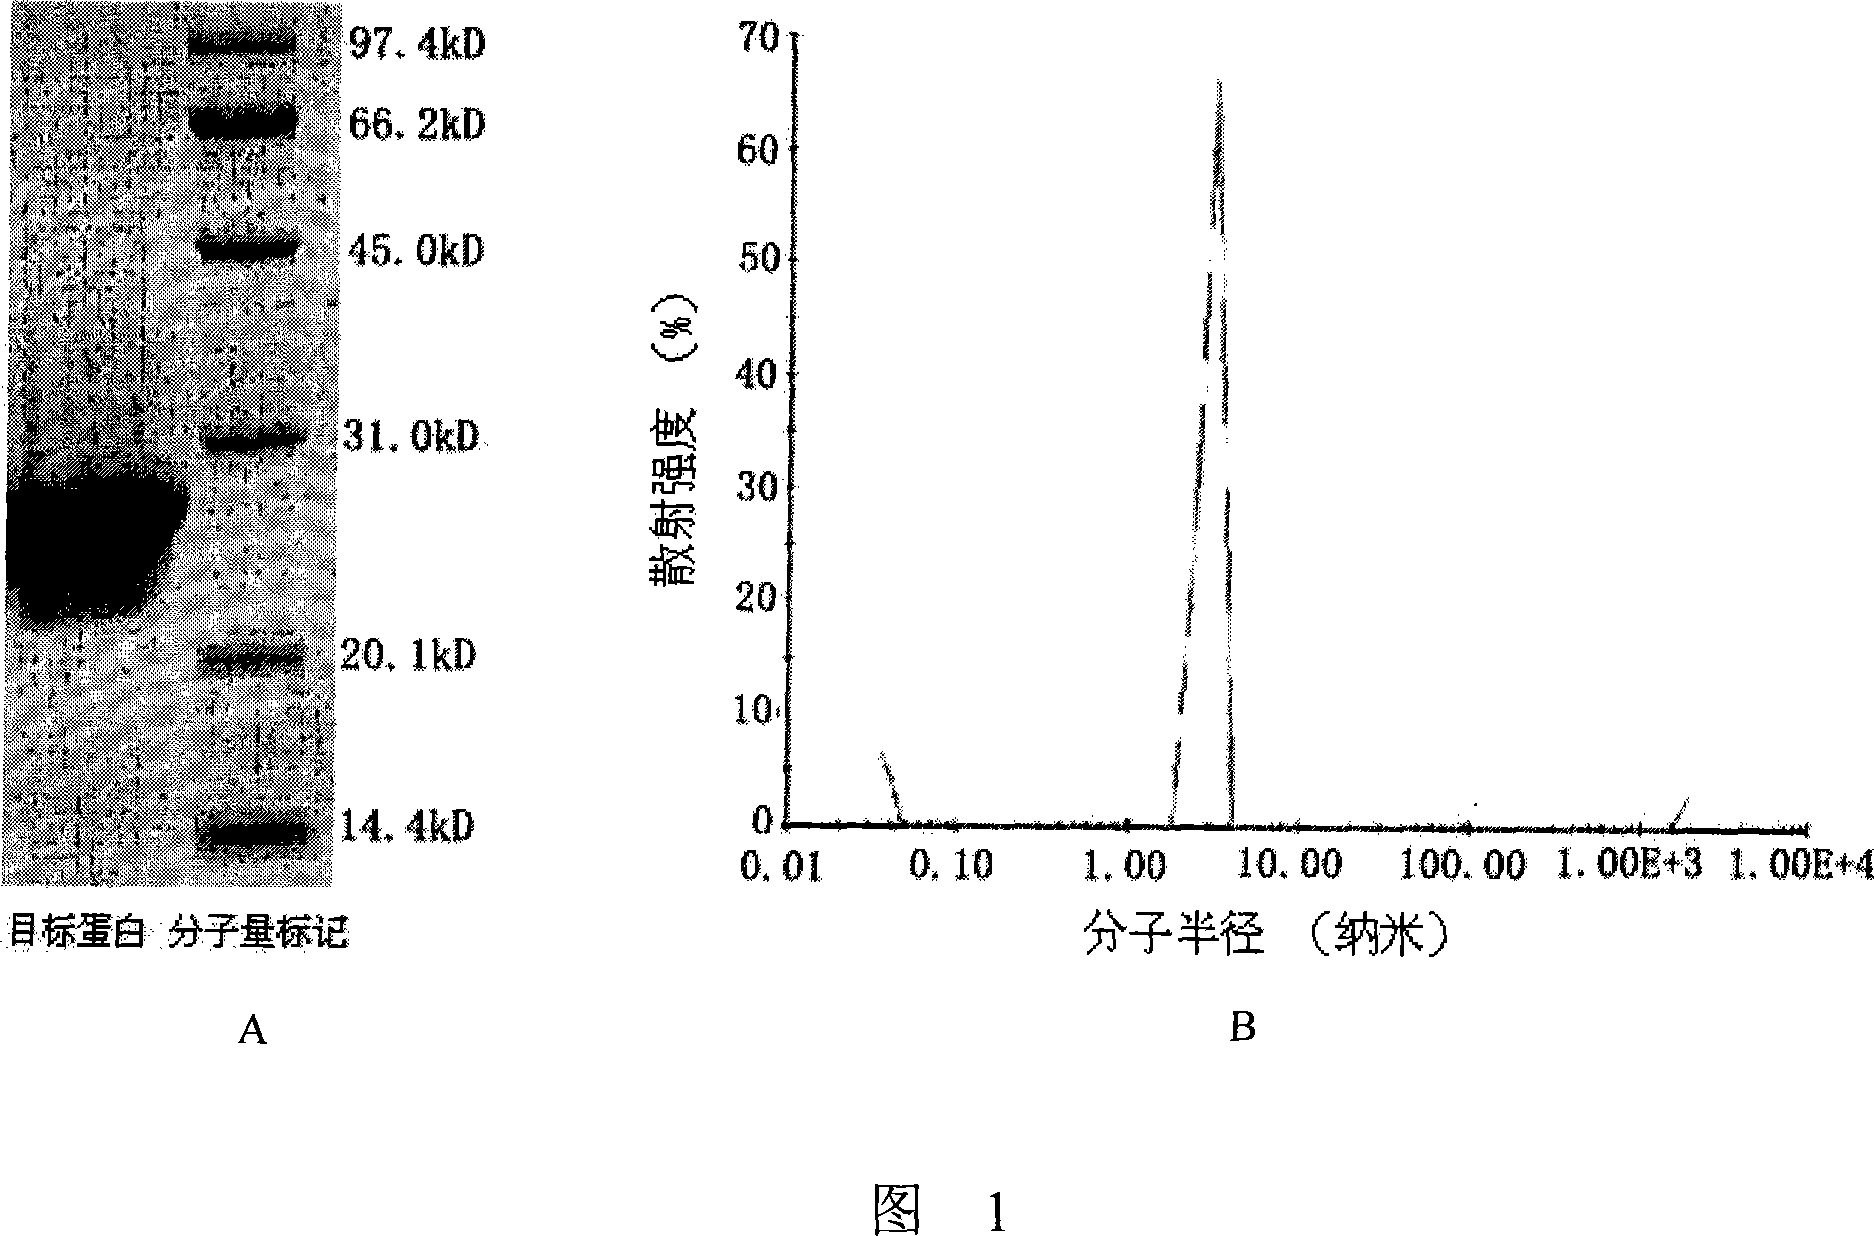 Compound for Fab fragment of Rituximab and CD20 antigen epitope polypeptide